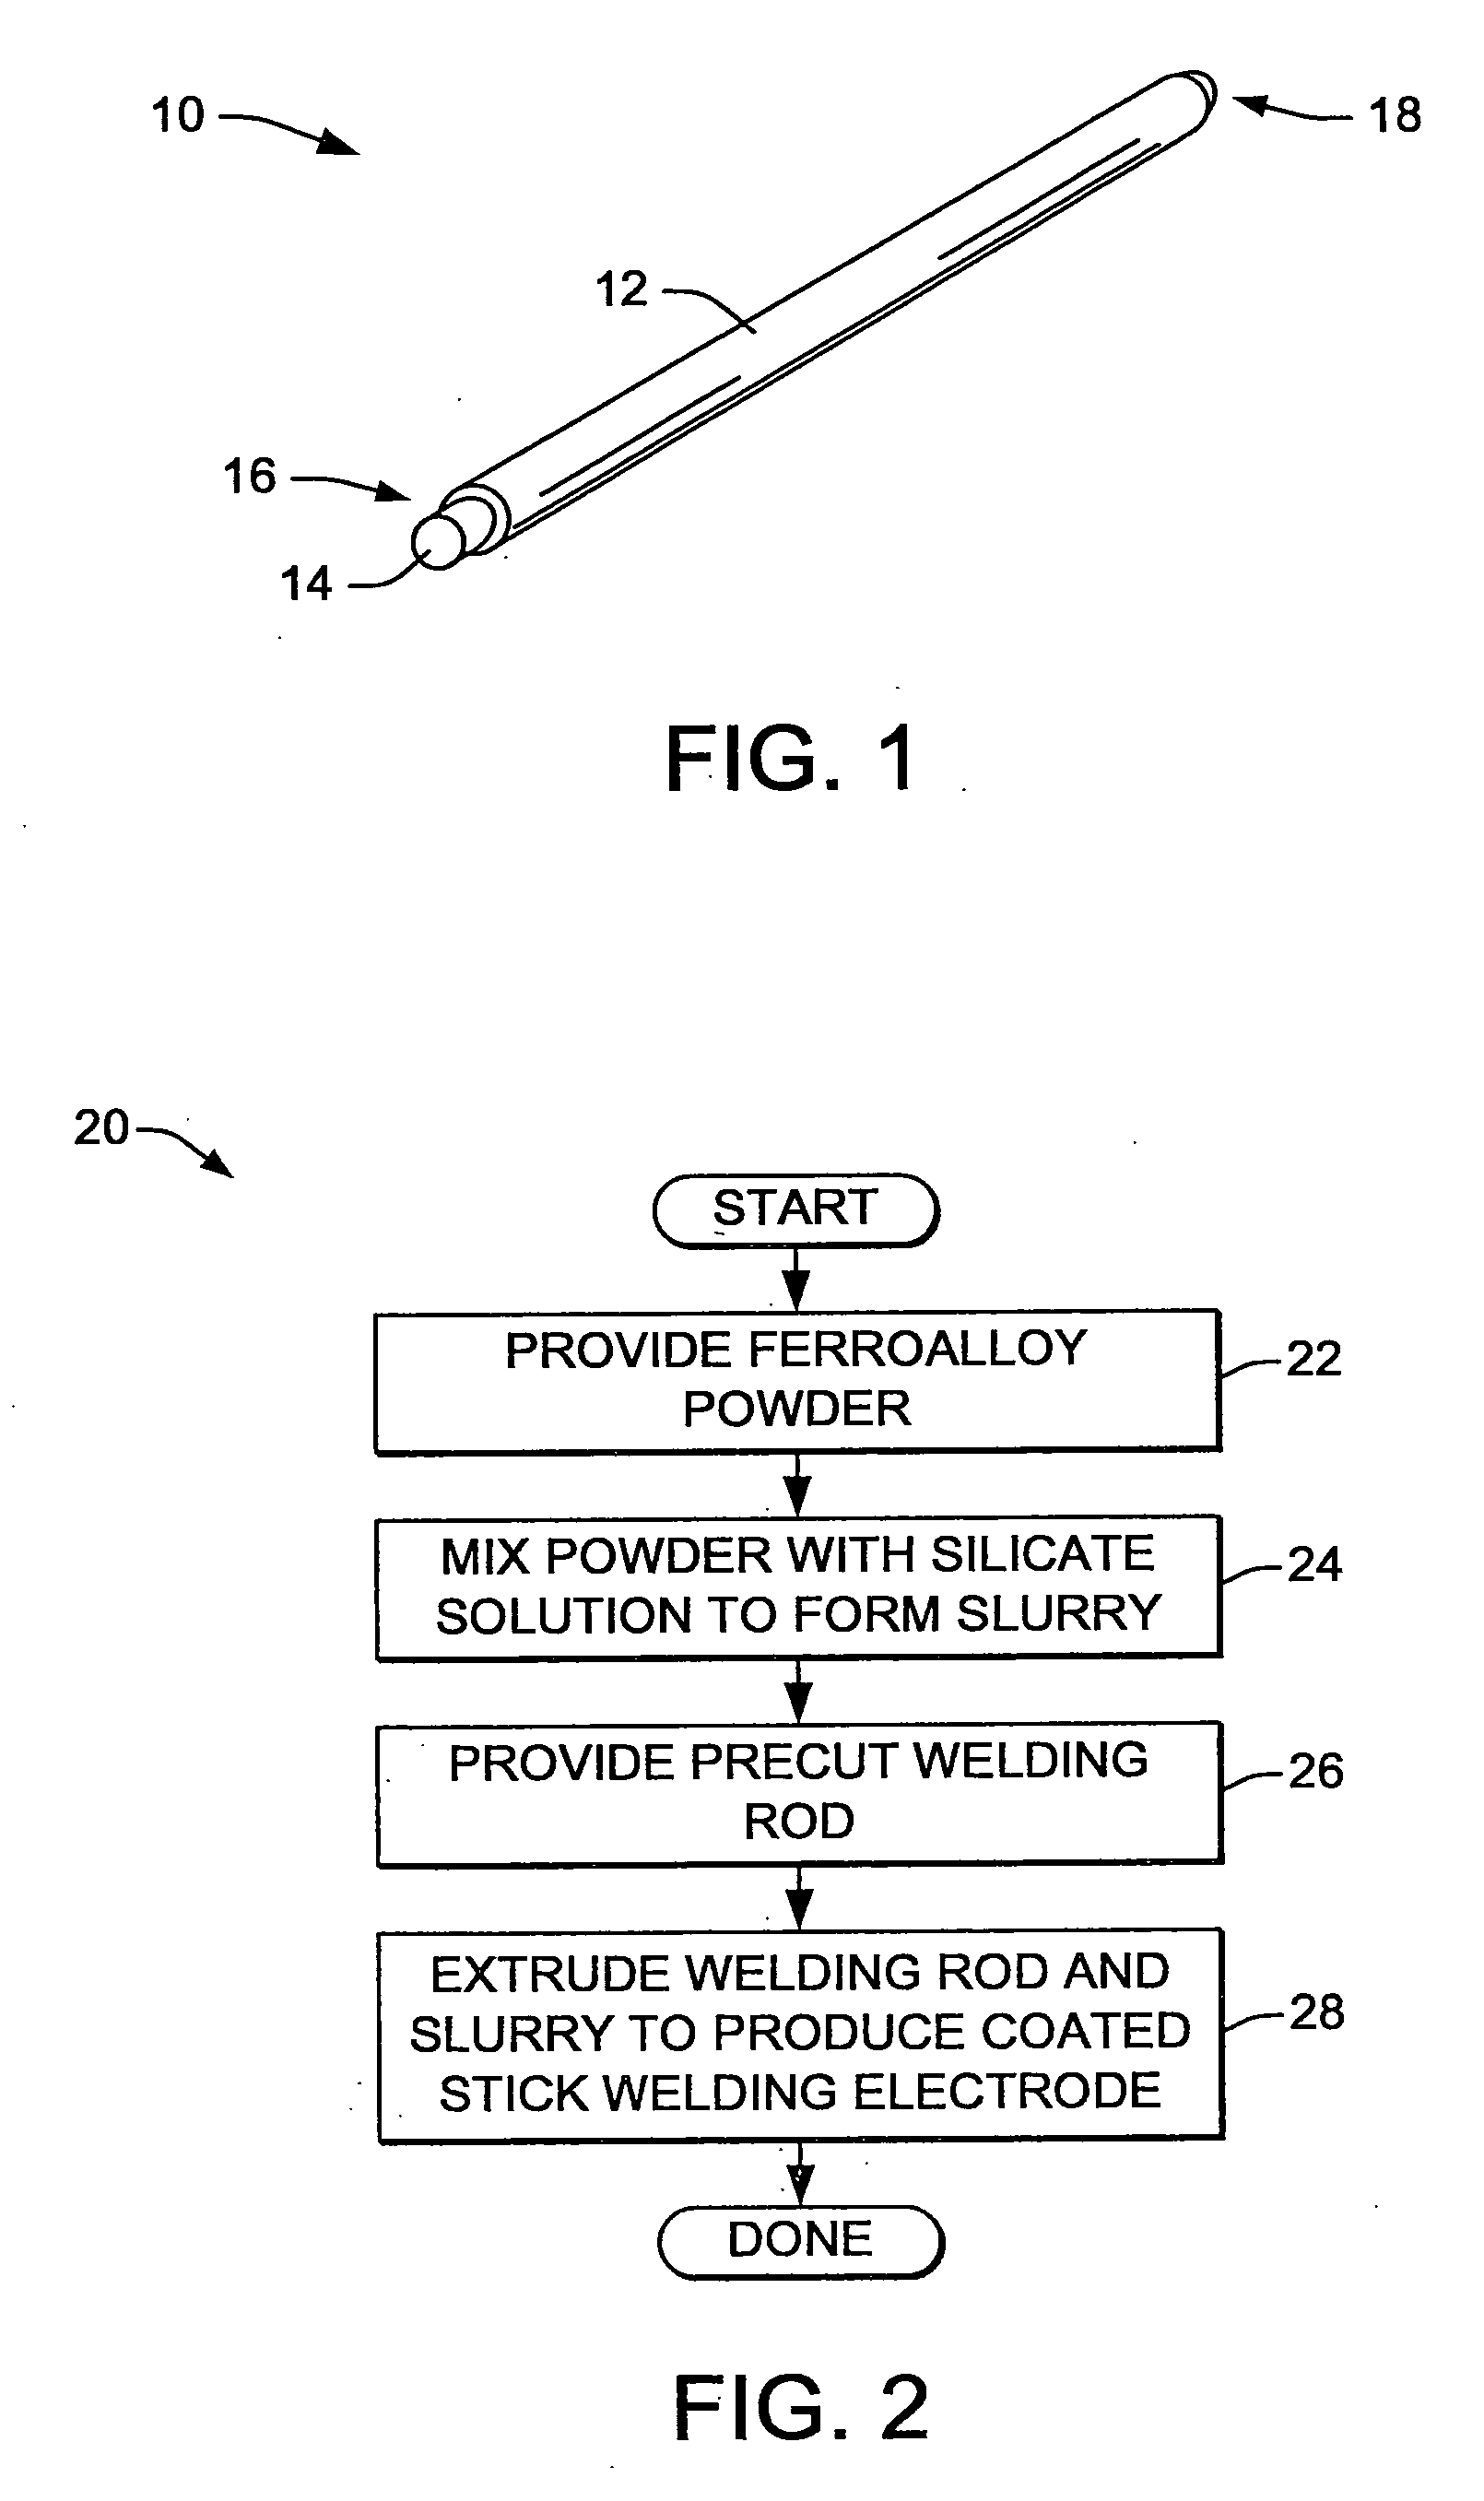 Method for reducing reactivity of ferroalloys used in fabricating coated stick welding electrodes